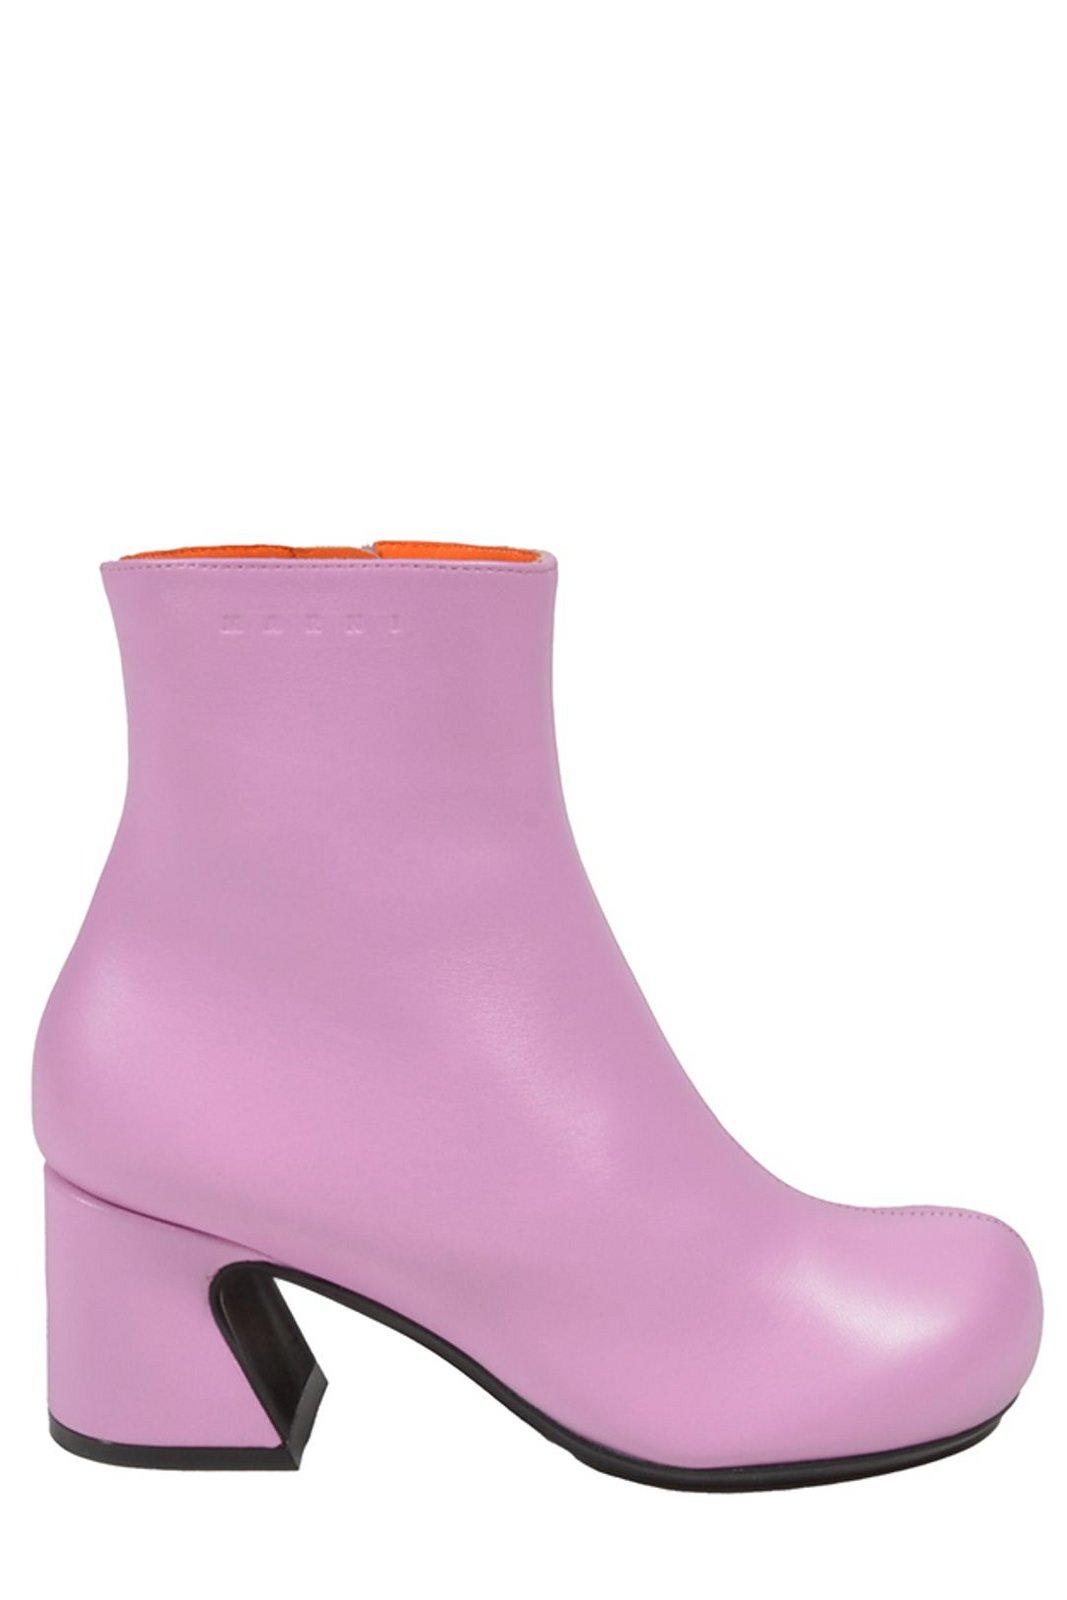 Marni Round Toe Zip-up Ankle Boots